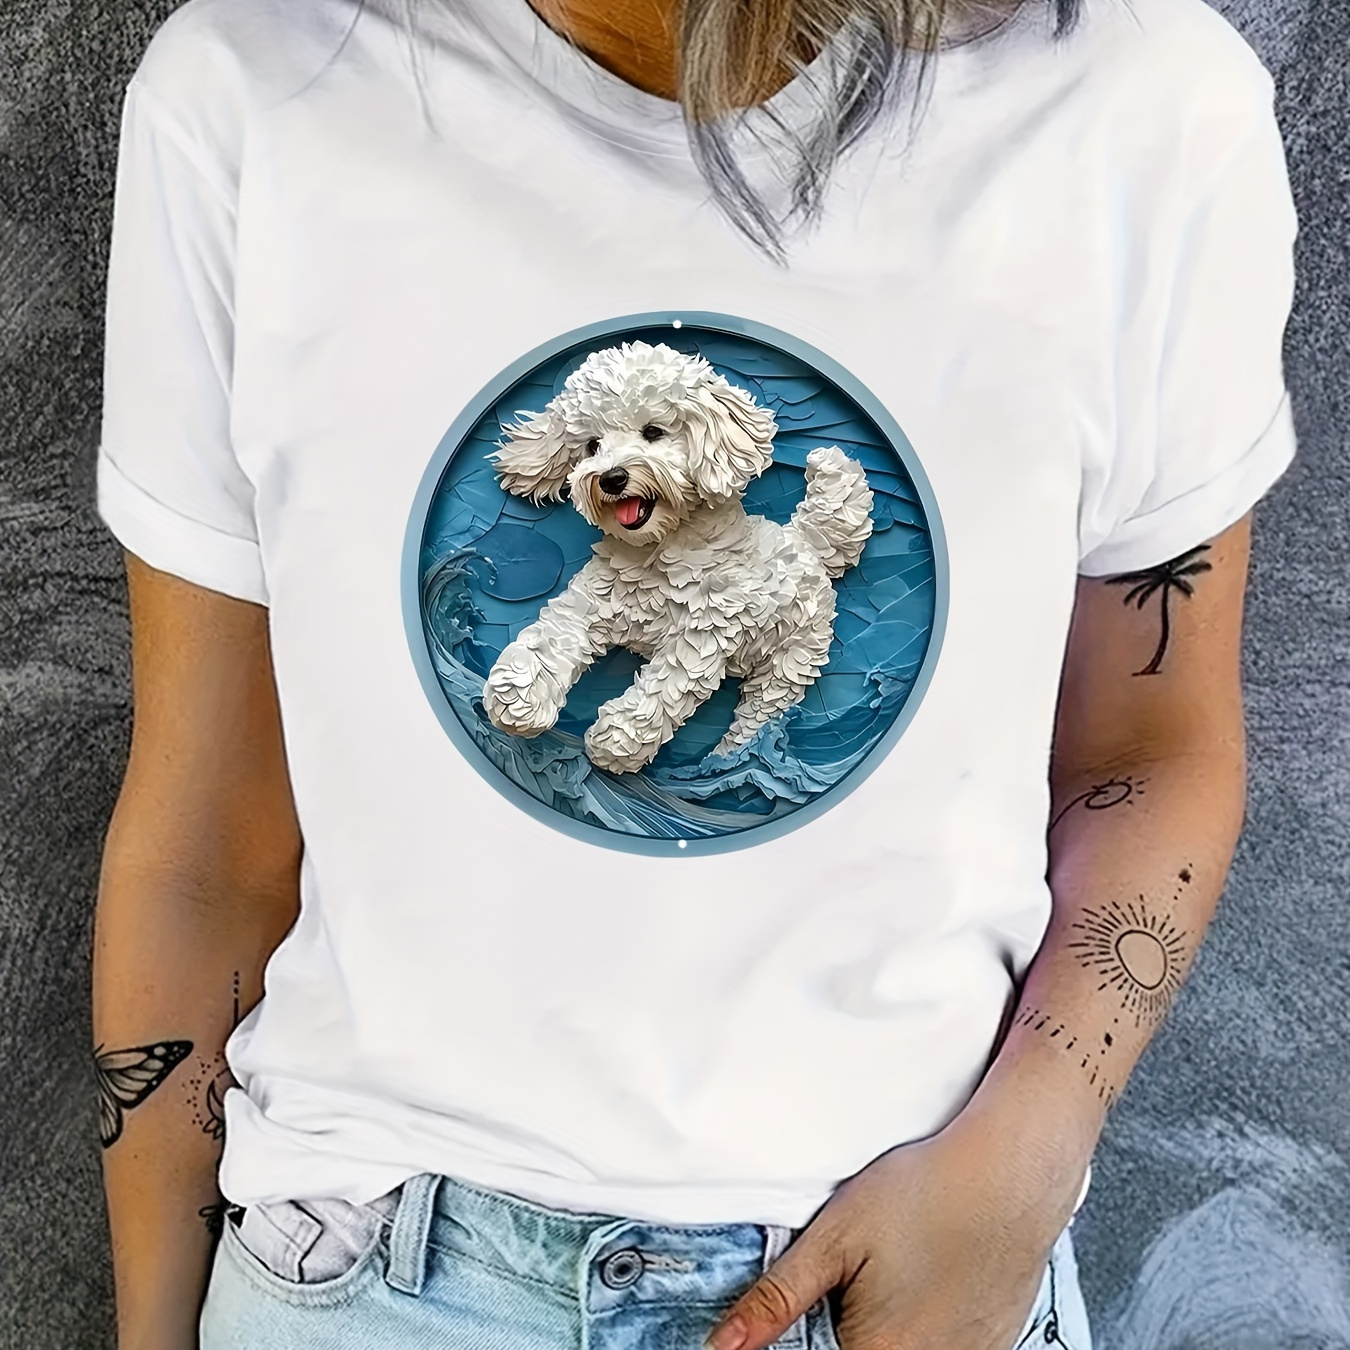 

Three-dimensional Puppy Print T-shirt, Short Sleeve Crew Neck Casual Top For Summer & Spring, Women's Clothing